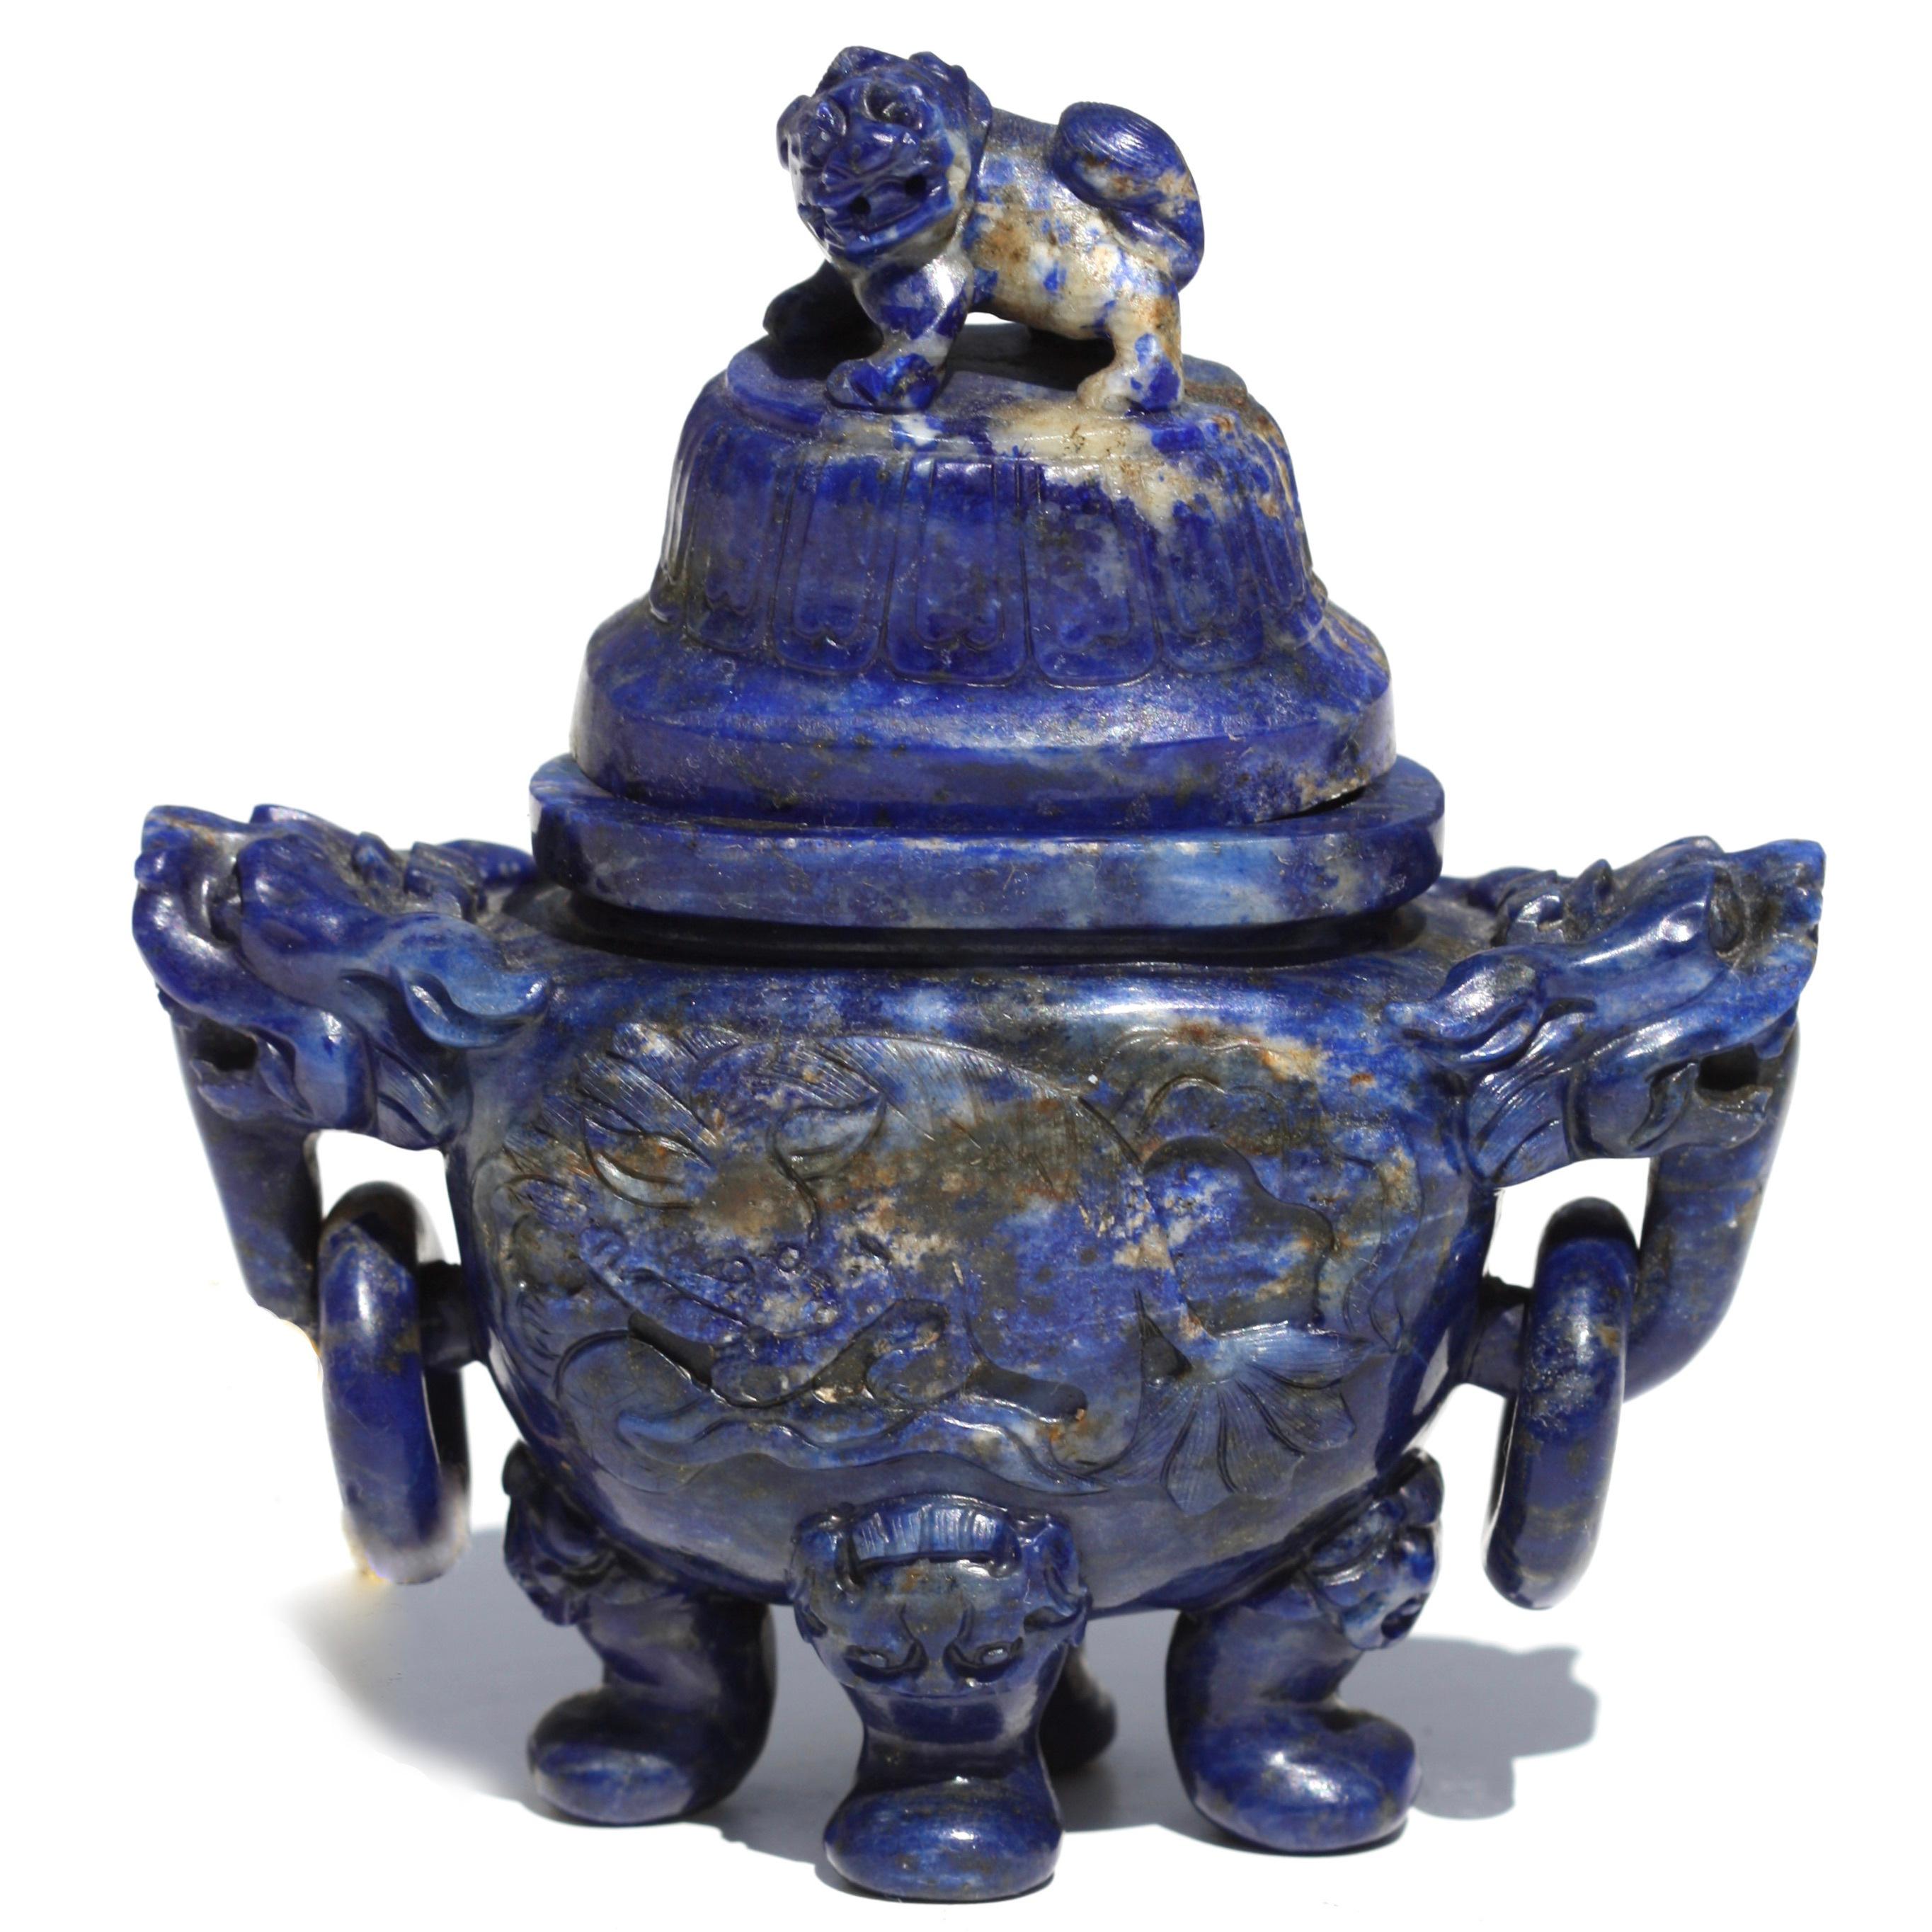 Fine sodalite burner and cover
Chinese
20th Century
Flanked by foo dog handles with loose rings resting upon four feet, the cover with foo-fog finial. The softly polished stone is of a blue color with white inclusions.
Measure: 4.25 in. (10.62